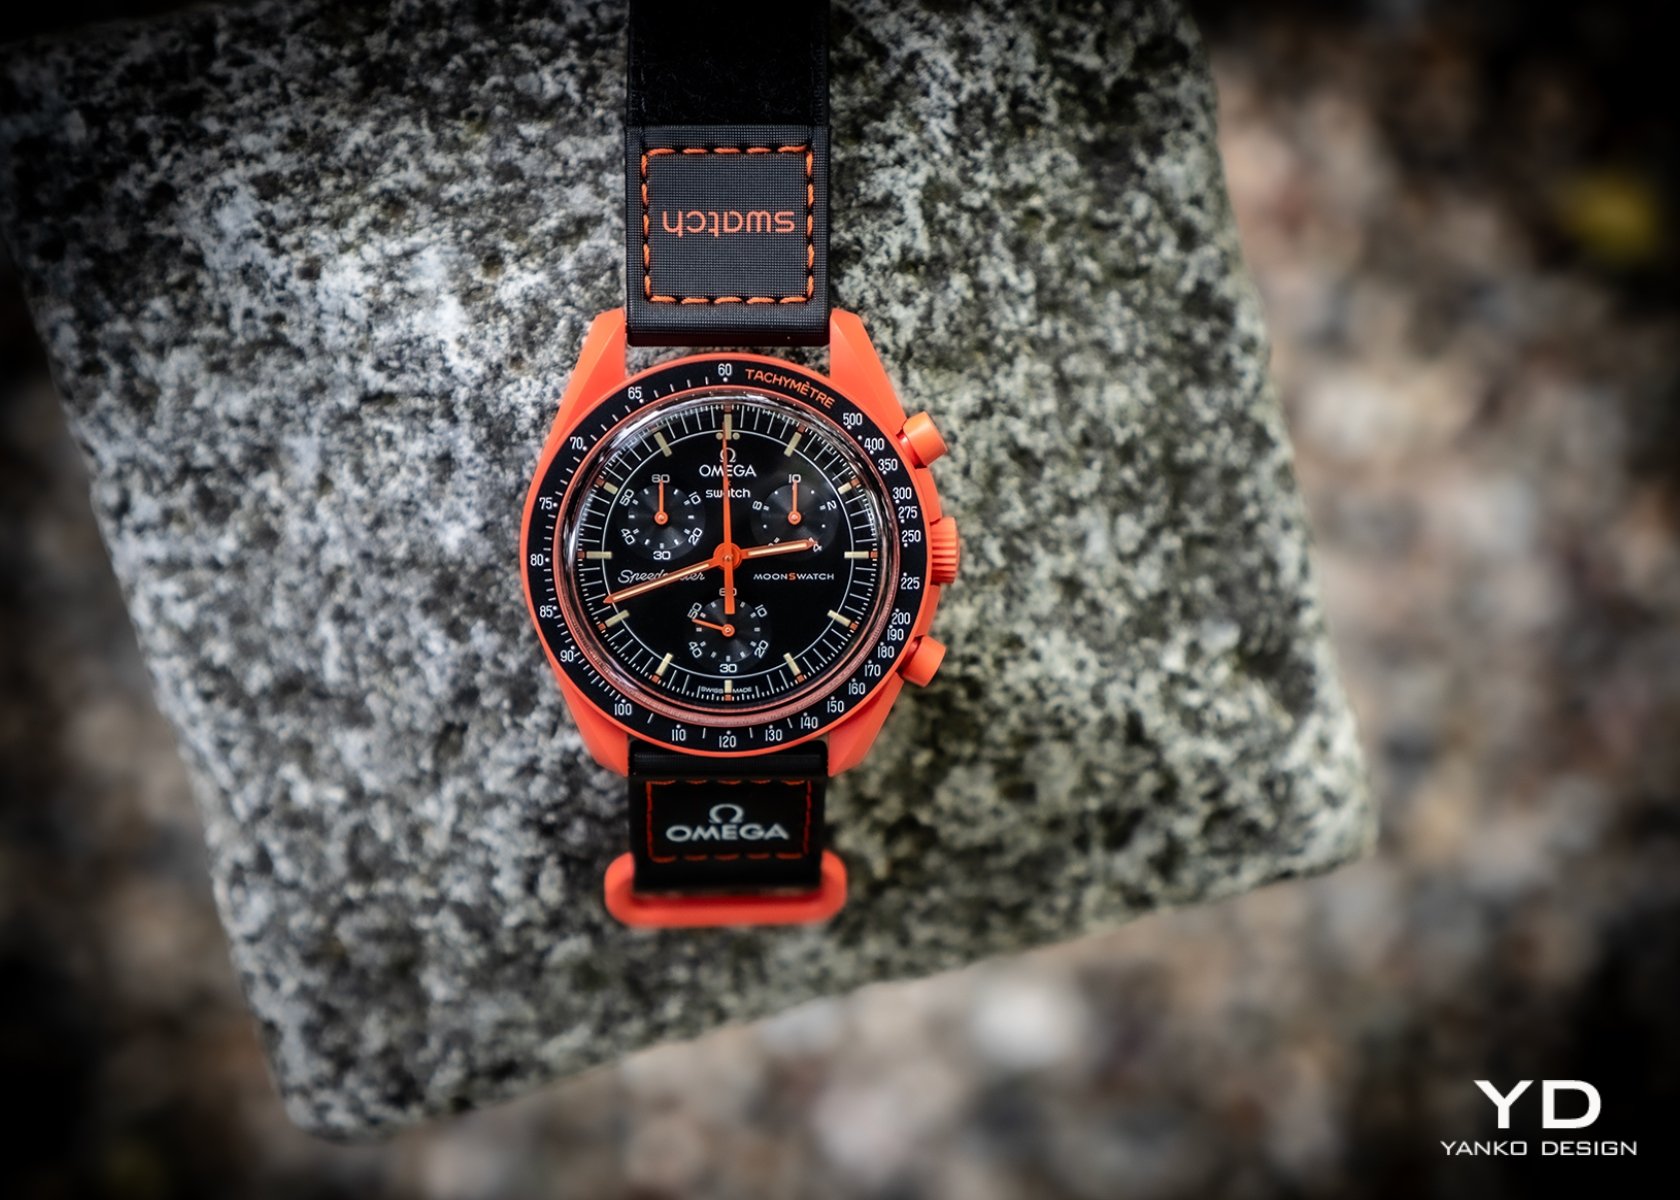 #Omega x Swatch MoonSwatch Lava: A Fiery Review of Its Design and Performance